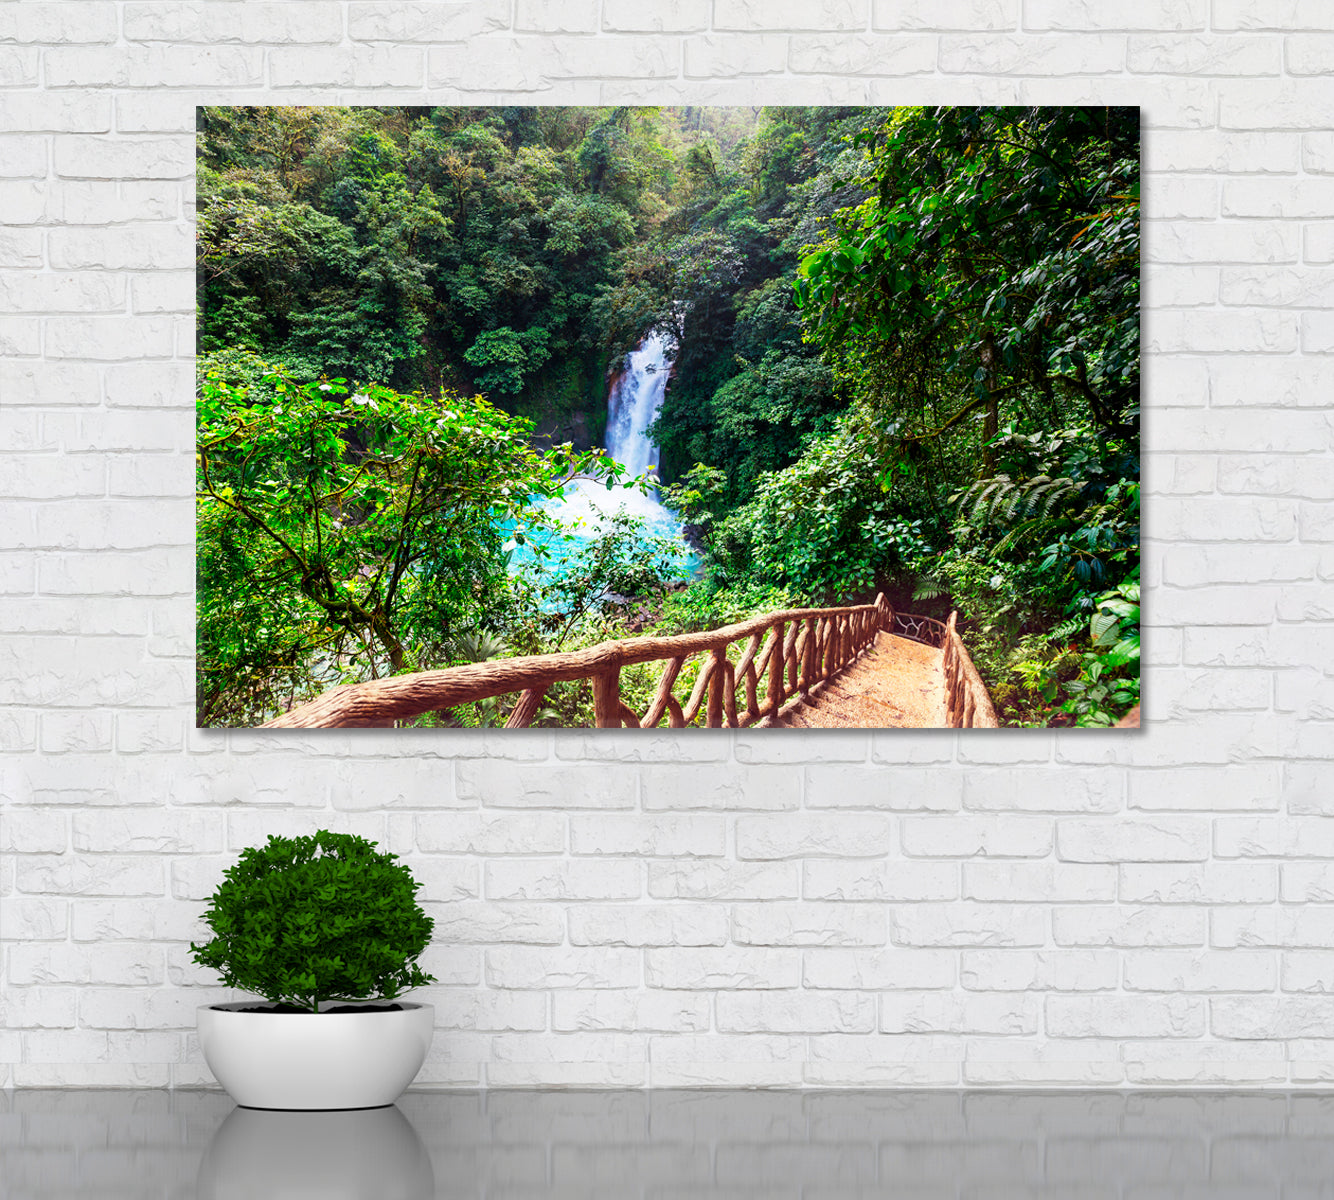 Waterfall in Rainforest of Costa Rica Canvas Print ArtLexy 1 Panel 24"x16" inches 